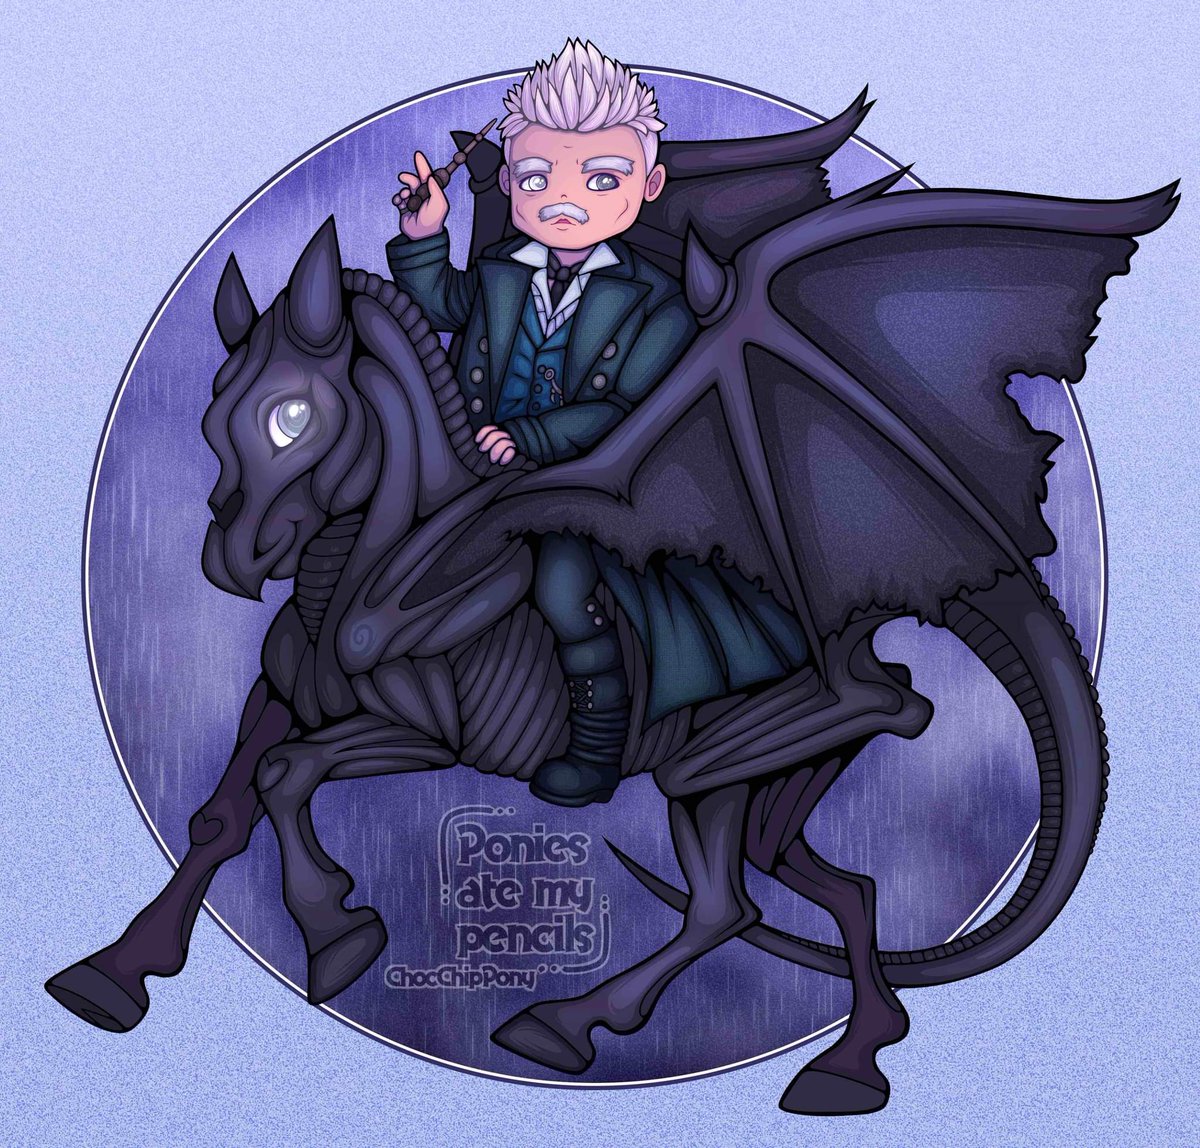 Starting off spooky month with Grindelwald riding a thestral. 

#JohnnyDepp #JohnnyDeppIsMyGrindelwald #JohnnyDeppDeservesAnApology #JohnnyDeppIsARockStar #JohnnyDeppIsALegend #Fanart #spookymonth #fanart #ArtistOnTwitter